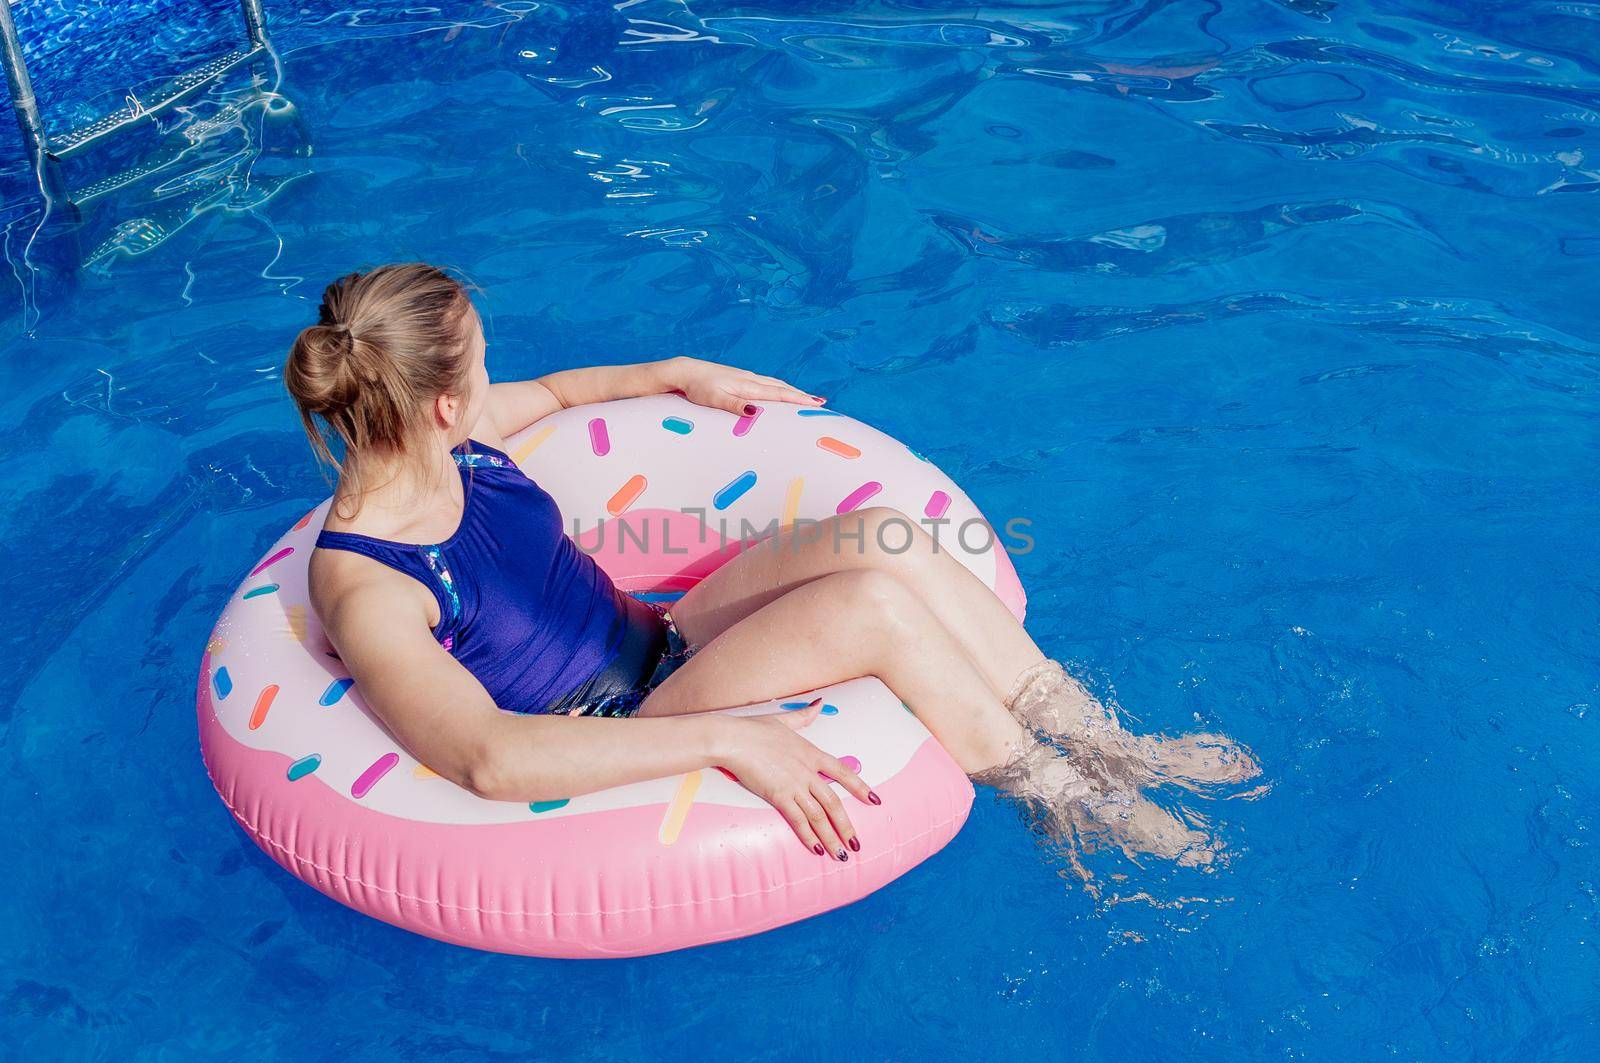 Summer warm vacation. The girl sits on a rubber ring in the form of a donut in a blue pool. Time to relax on an air mattress. Having fun in the water for a family vacation. Sea resort. Copy space. by Alla_Morozova93